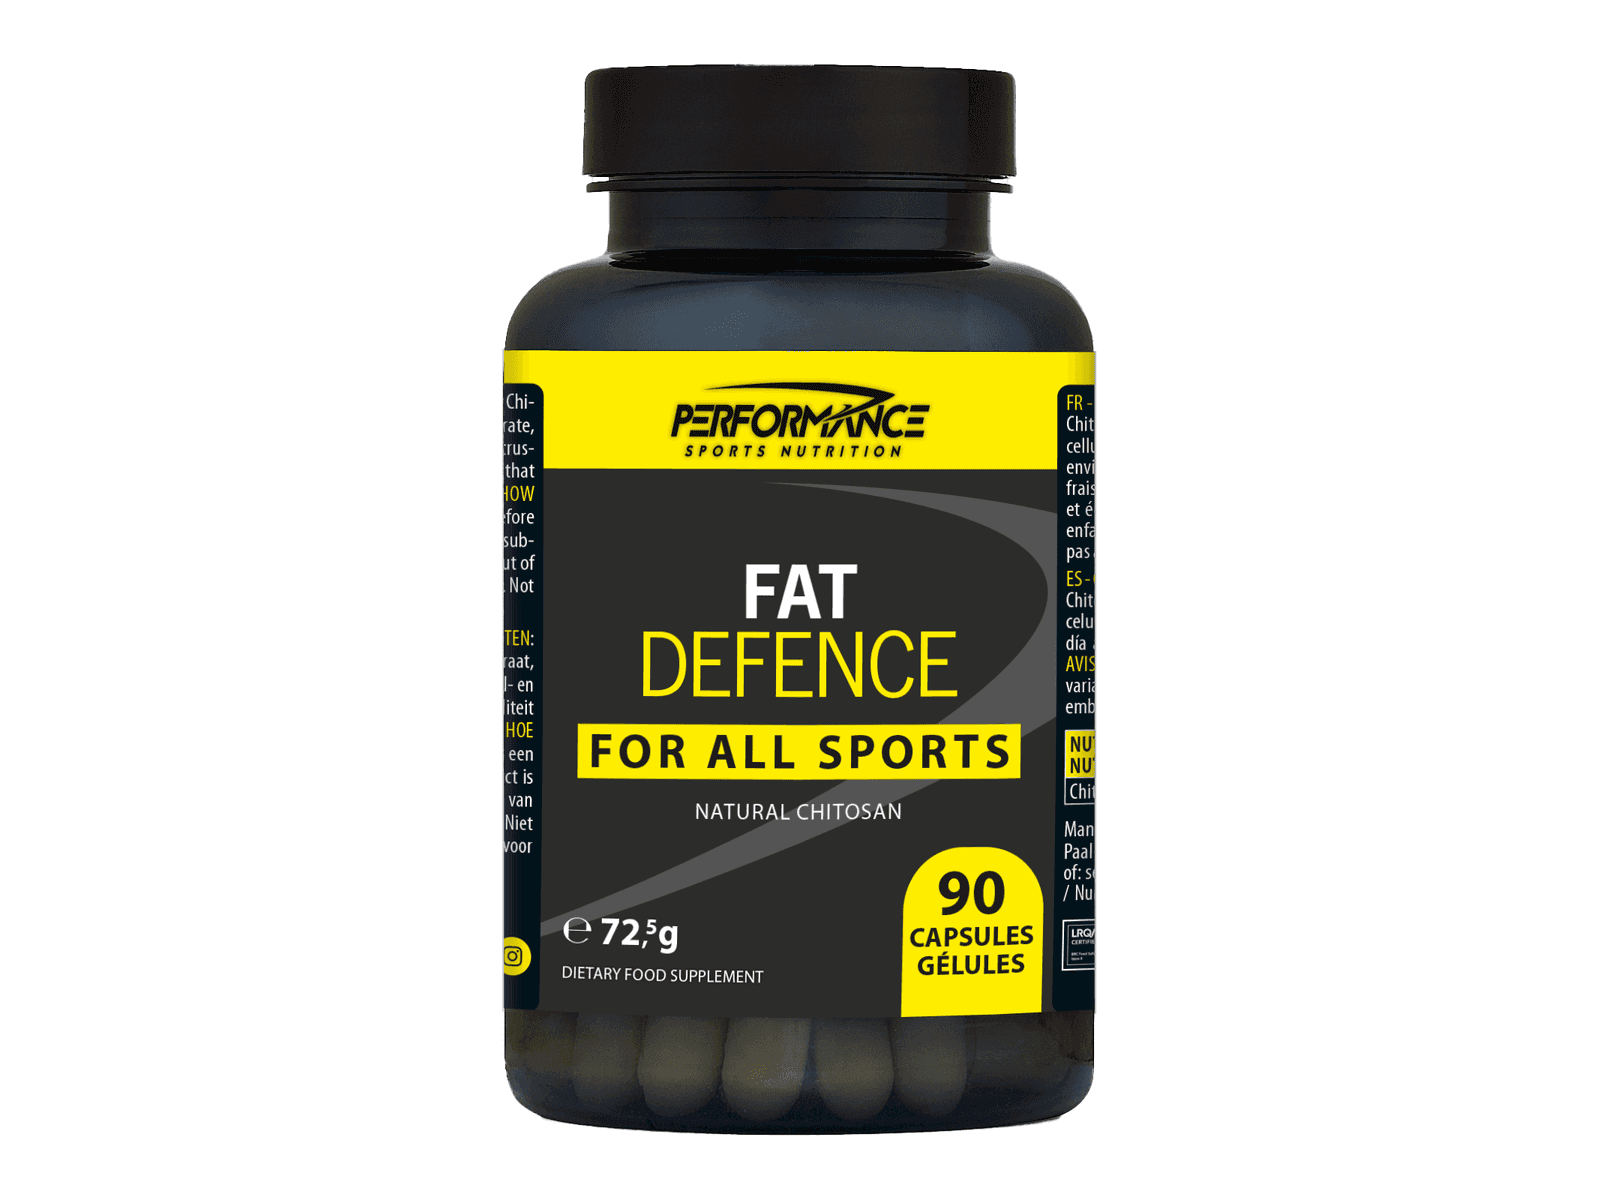 Fat Defence (90 capsules) - PERFORMANCE SPORTS NUTRITION